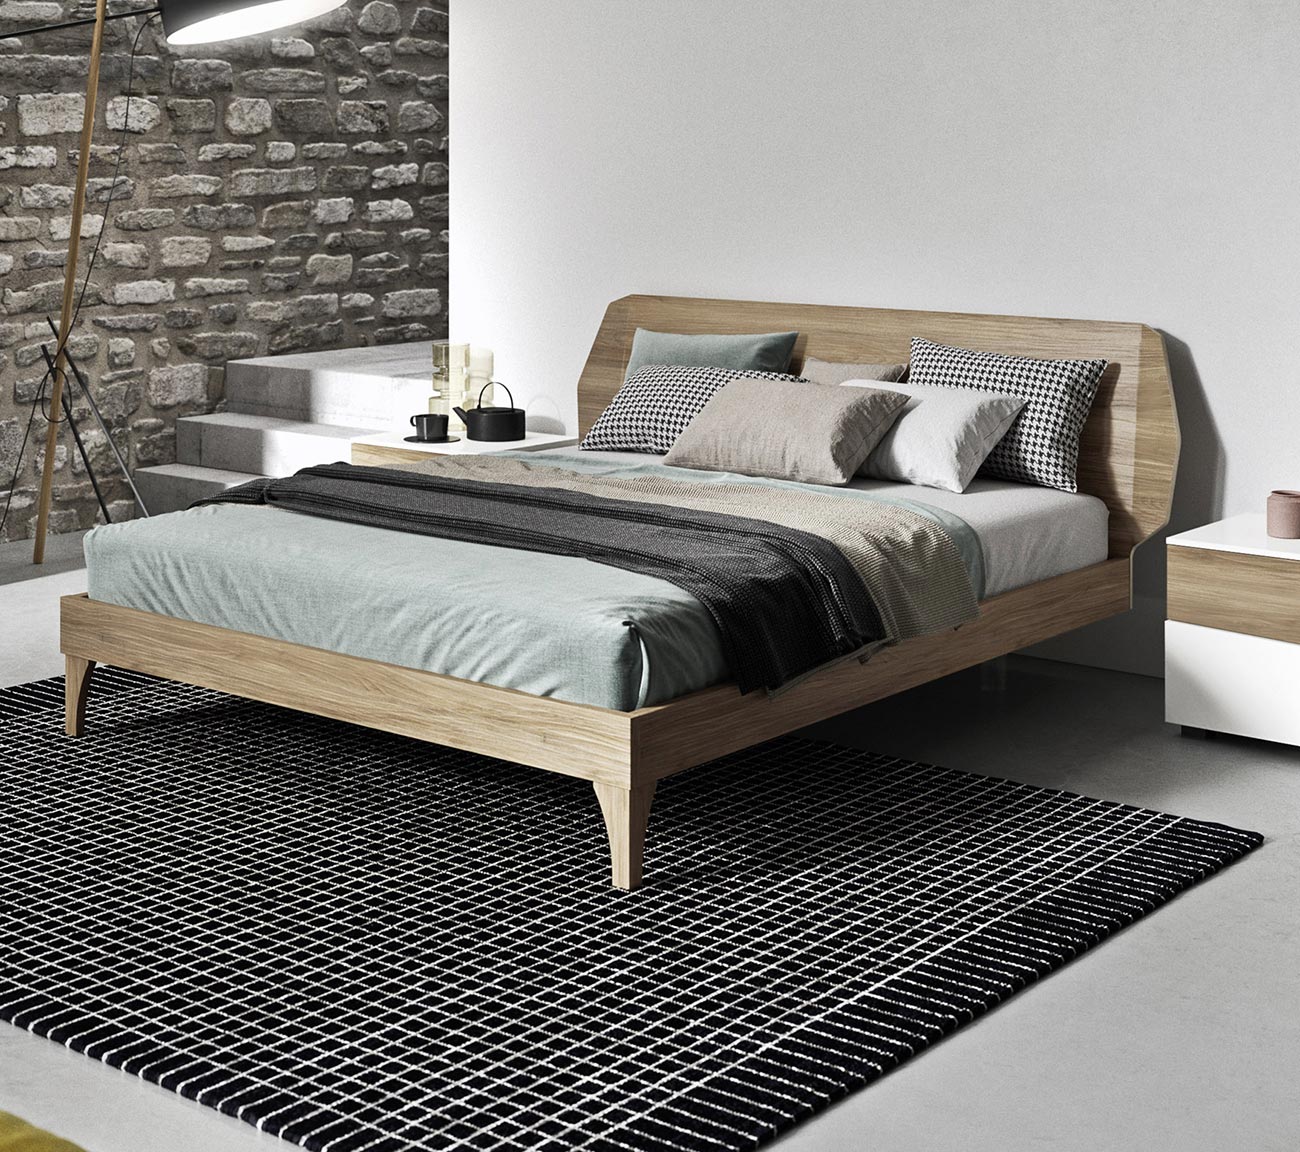 Minimalist total white double bed